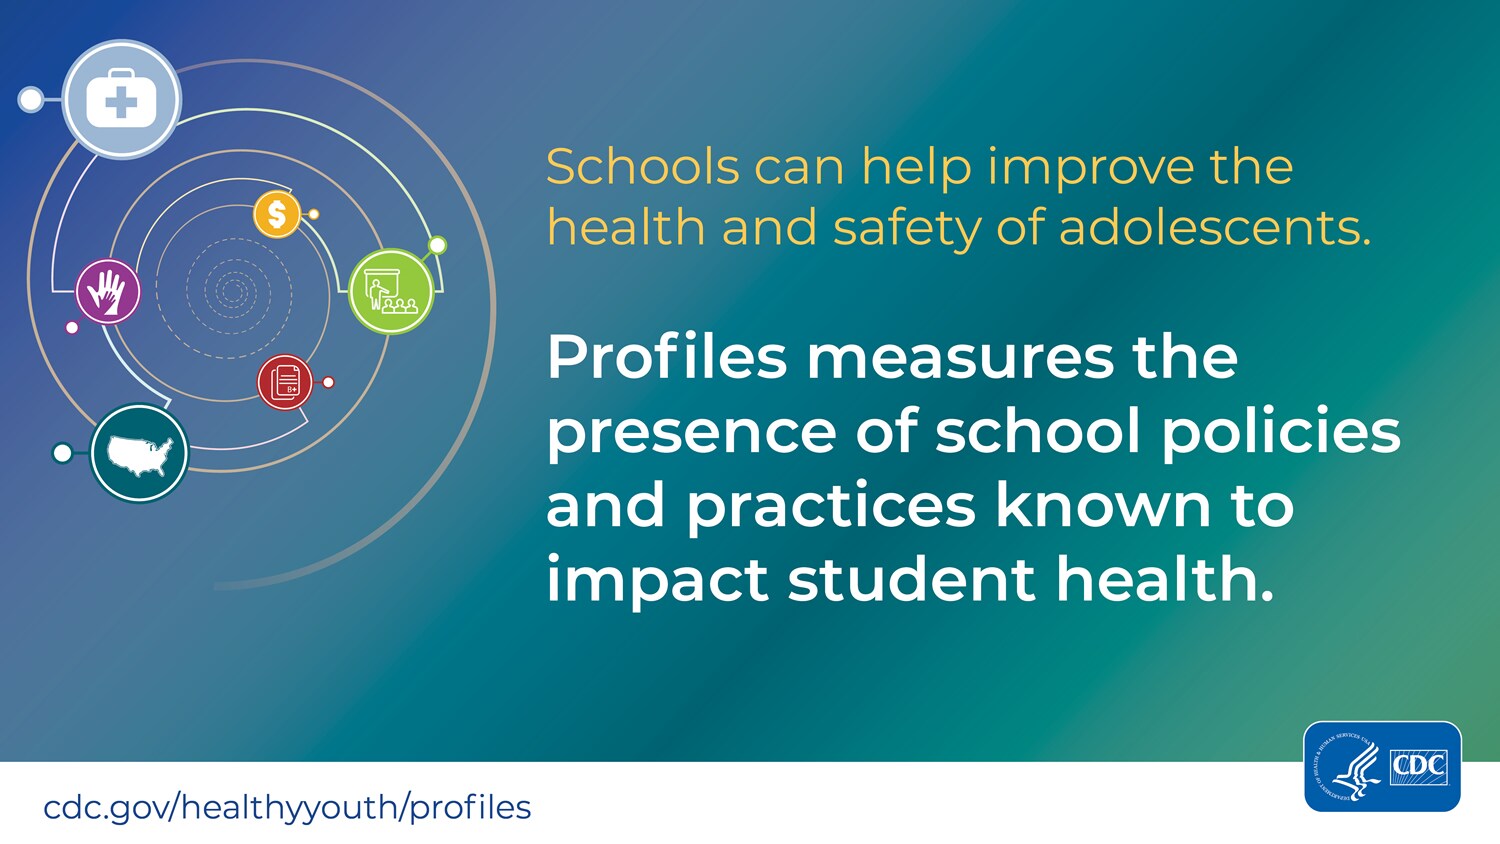 2018 School Health Profiles Infographic: Schools can improve the health and safety of adolescents. Profiles measures the presence of school policies and practices known to impact student health.